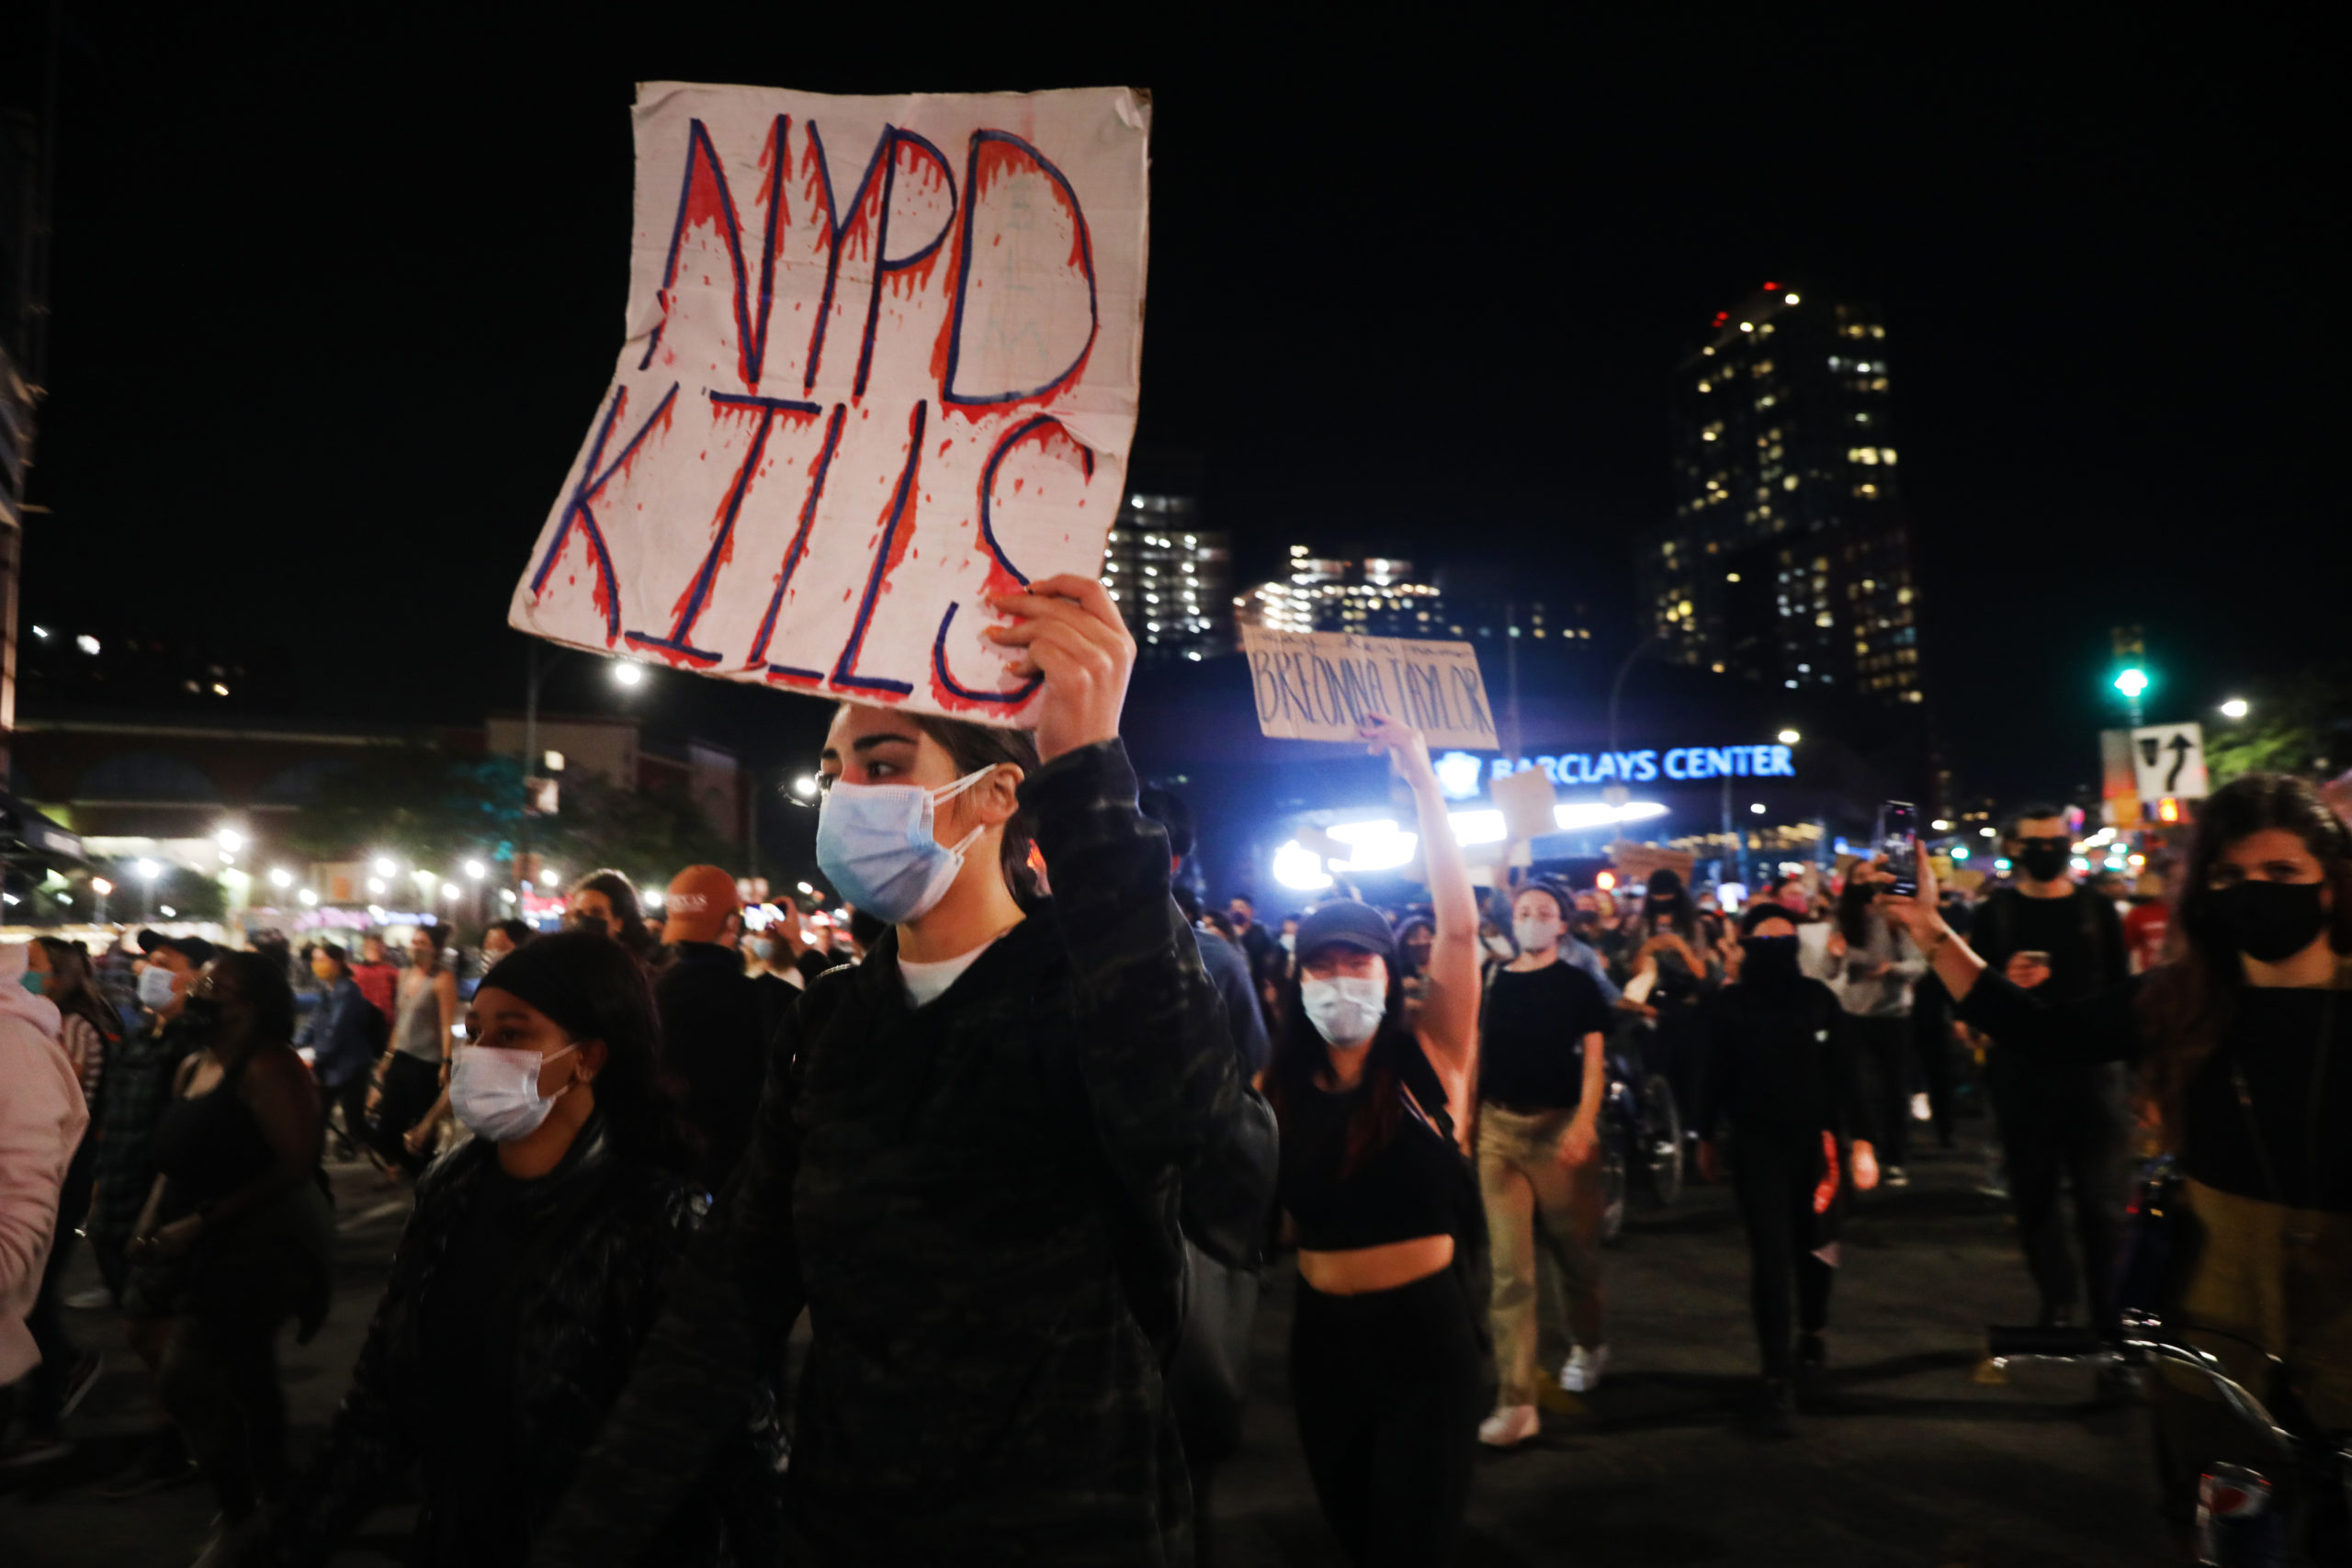 Members of Black Lives Matters are joined by hundreds of others during an evening protest on Sept. 23 in New York City. (Spencer Platt/Getty Images)